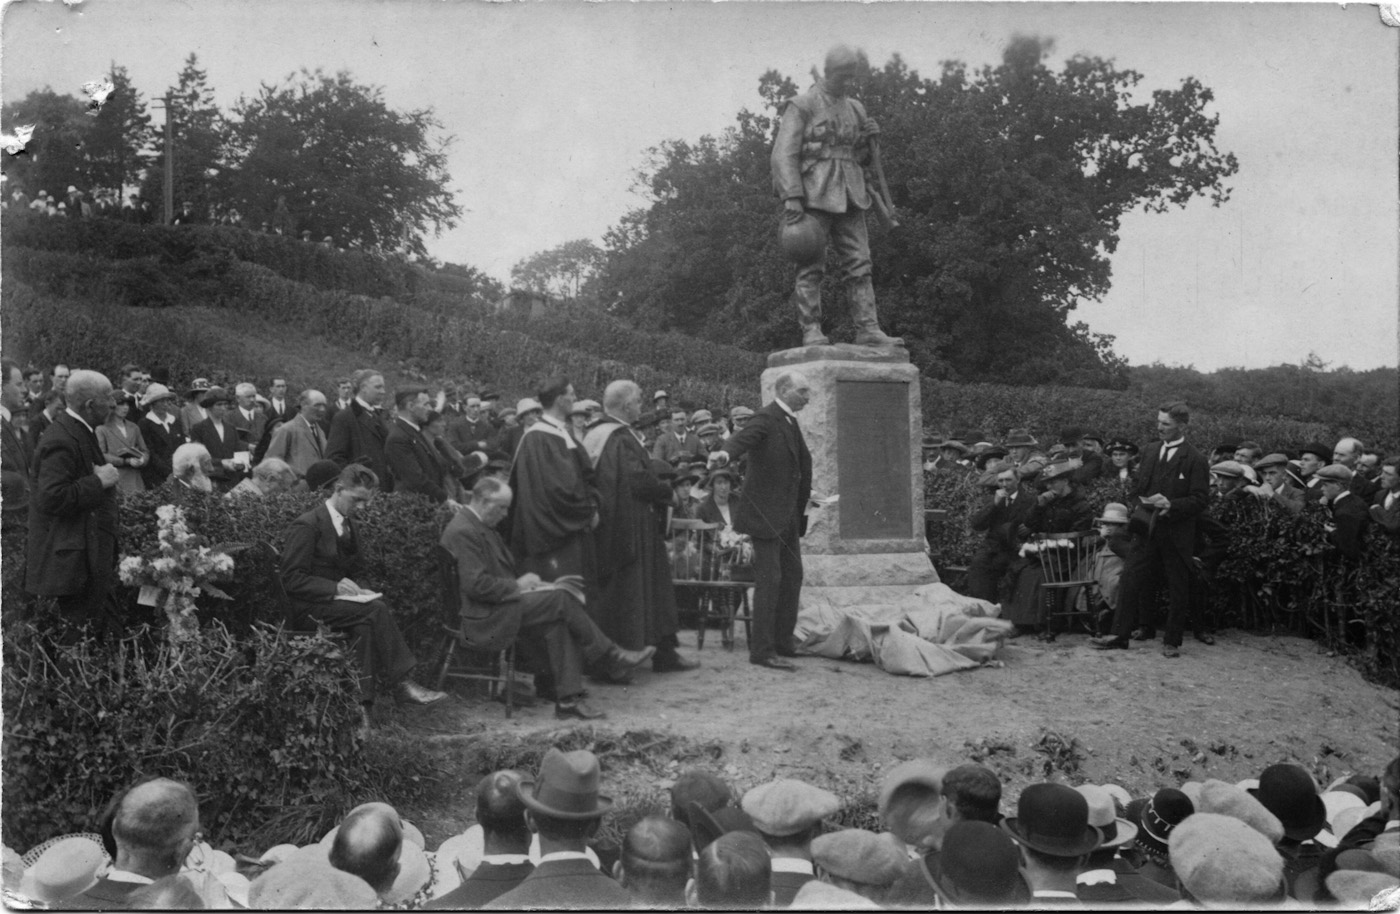 September 25th, 1921, Canonbie, Scotland.

My grandfather, Rev. J.E. McIntosh, (dark hair) stands 3rd to the left from the memorial. He was the minister of the United Free Church in Canonbie. Duke of Buccleuch has just pulled the string to unveil the sculpture. Sculptor: Thomas J. Clapperton. View full size.